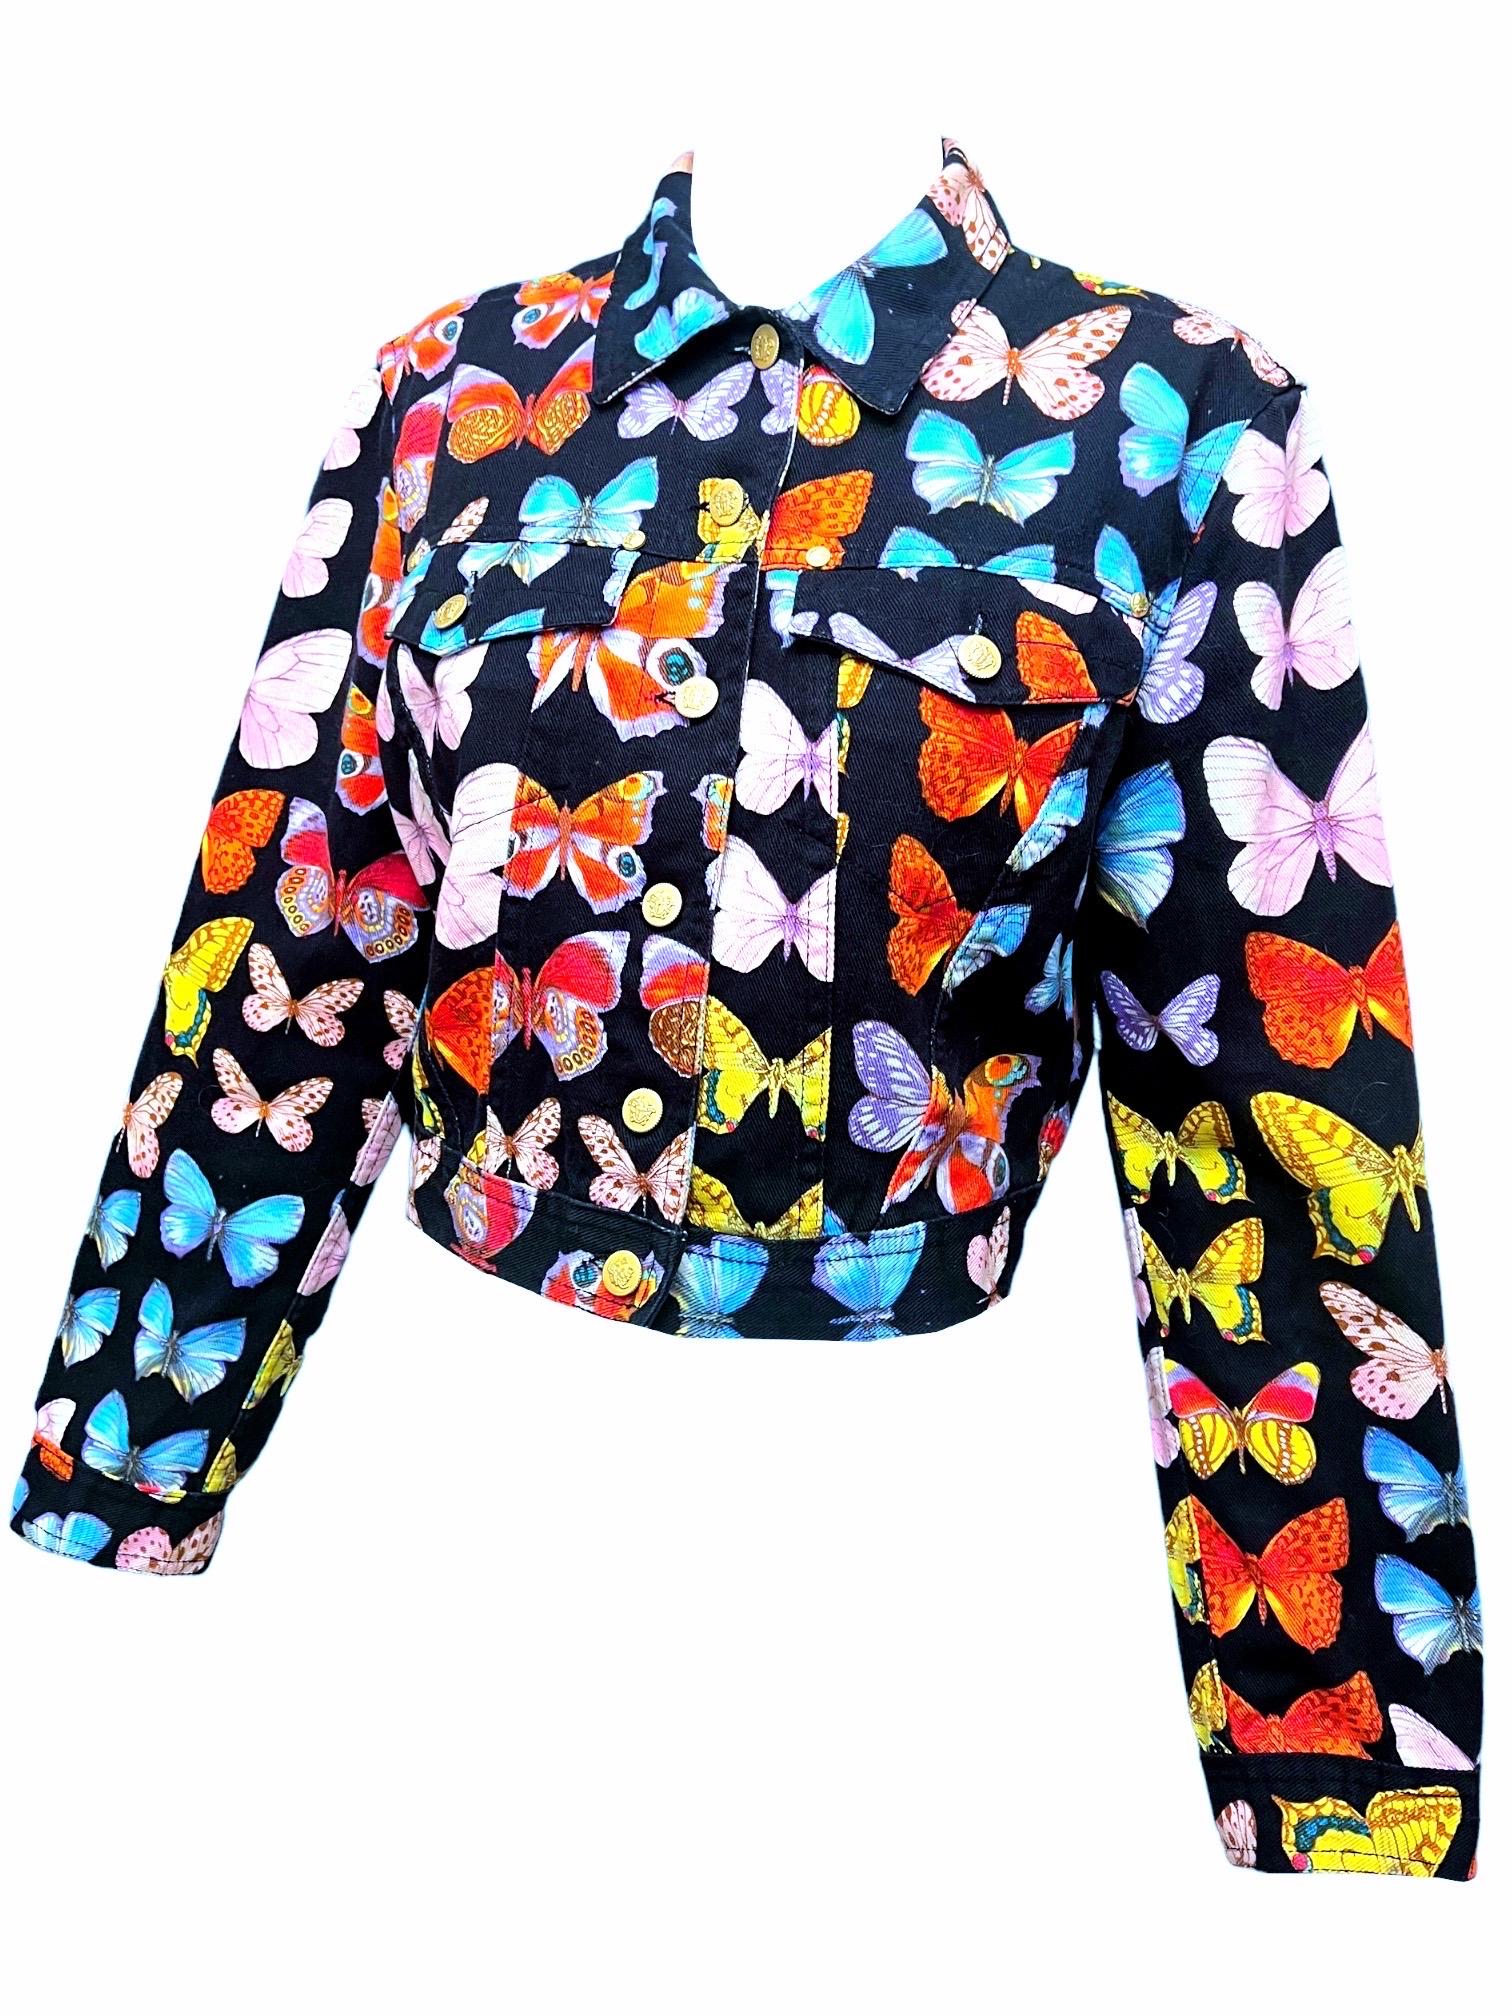 S/S 1995 Gianni Versace Butterfly Printed Jacket In Excellent Condition For Sale In Concord, NC